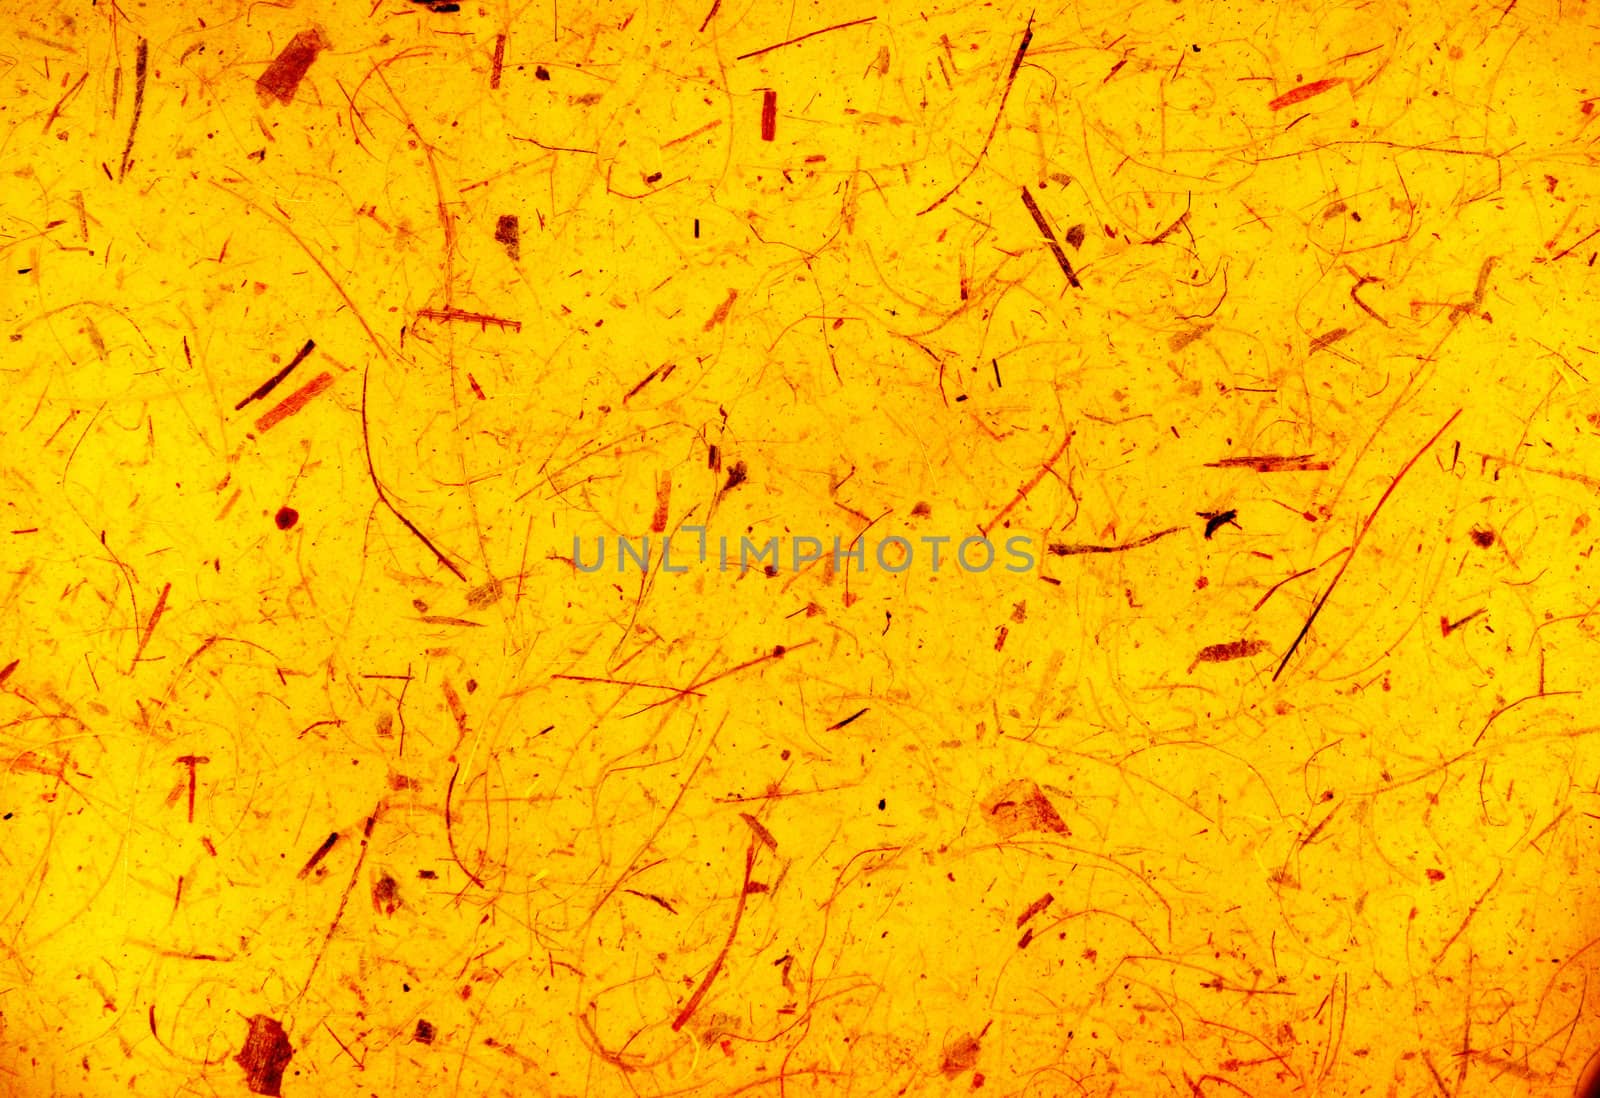 Texture handmade paper of yellow color